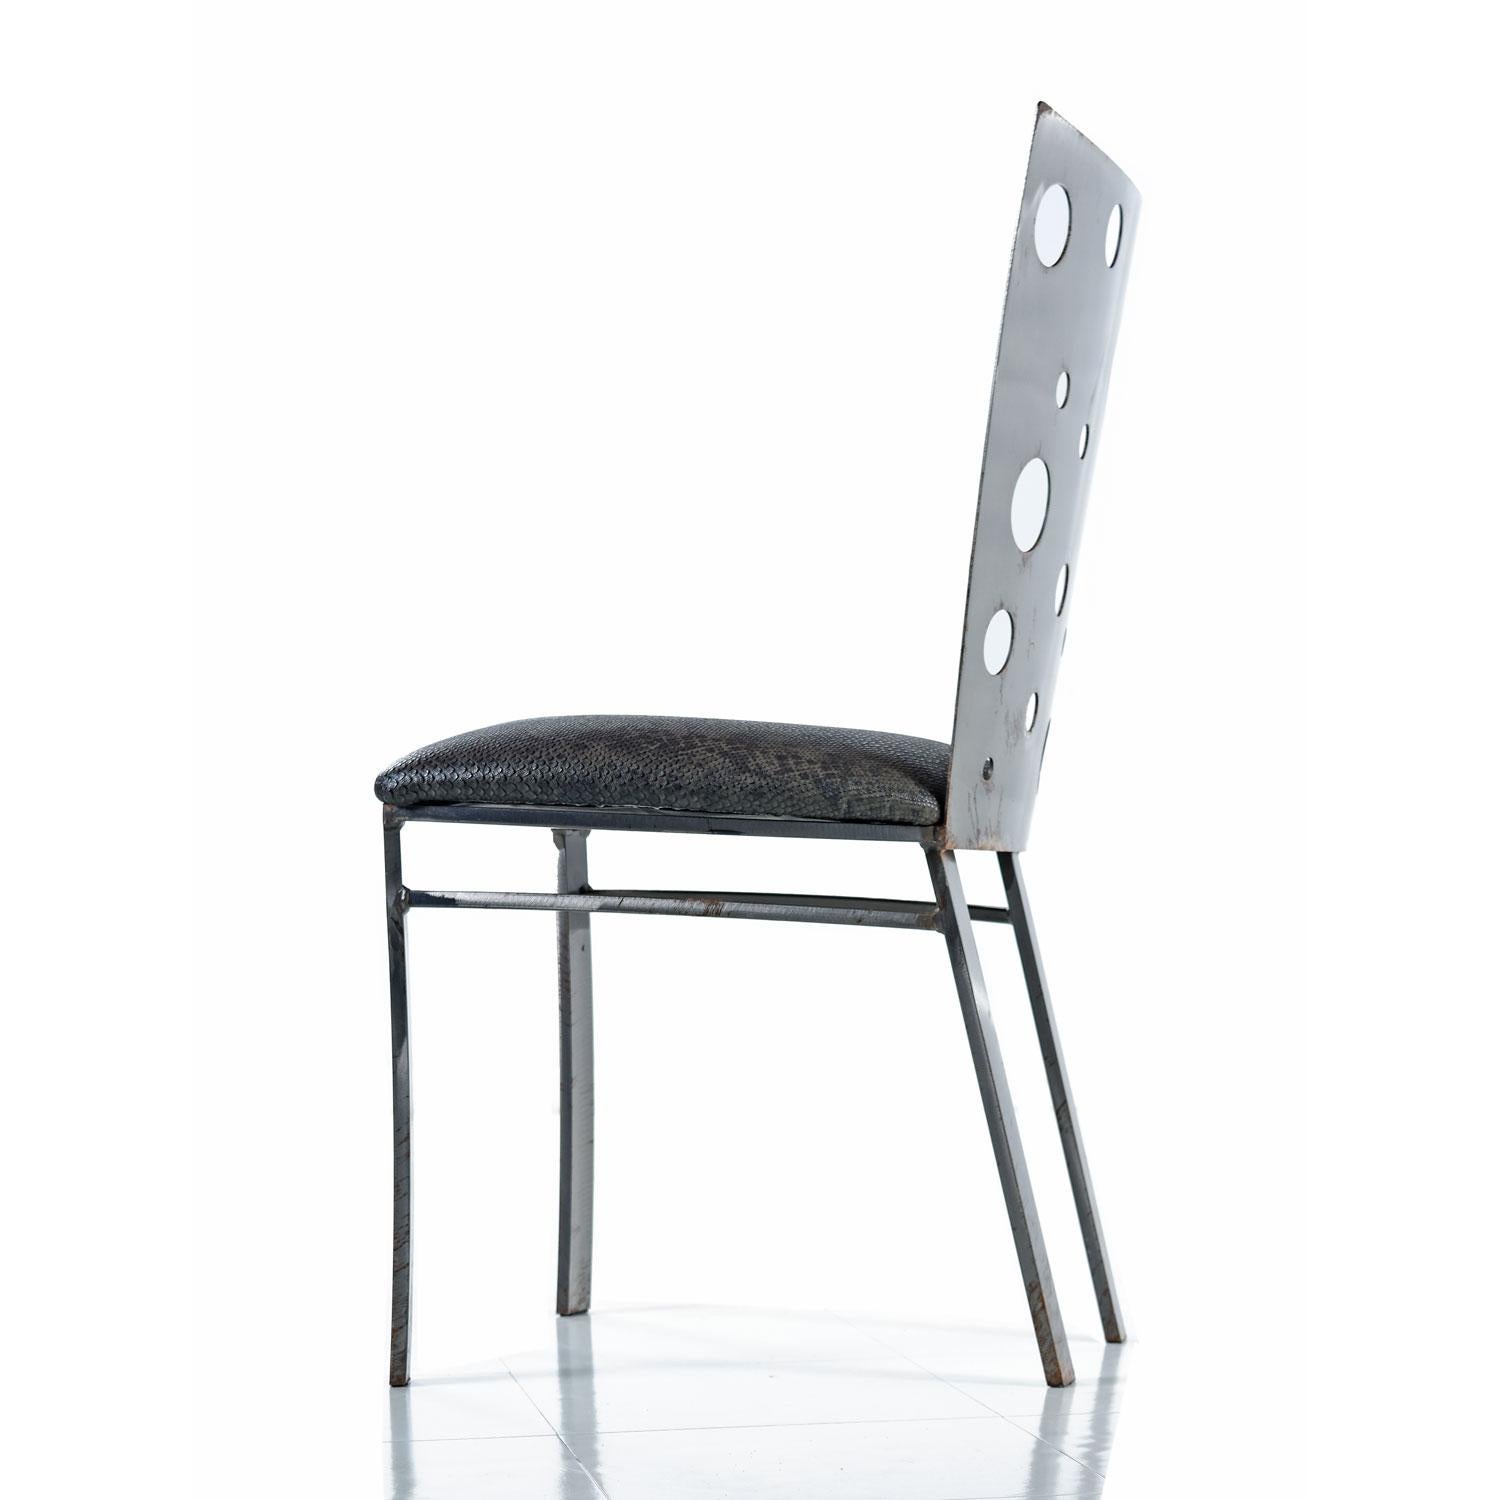 Snake Skin Vinyl Brutalist Style Dining Chairs By Johnston Casuals